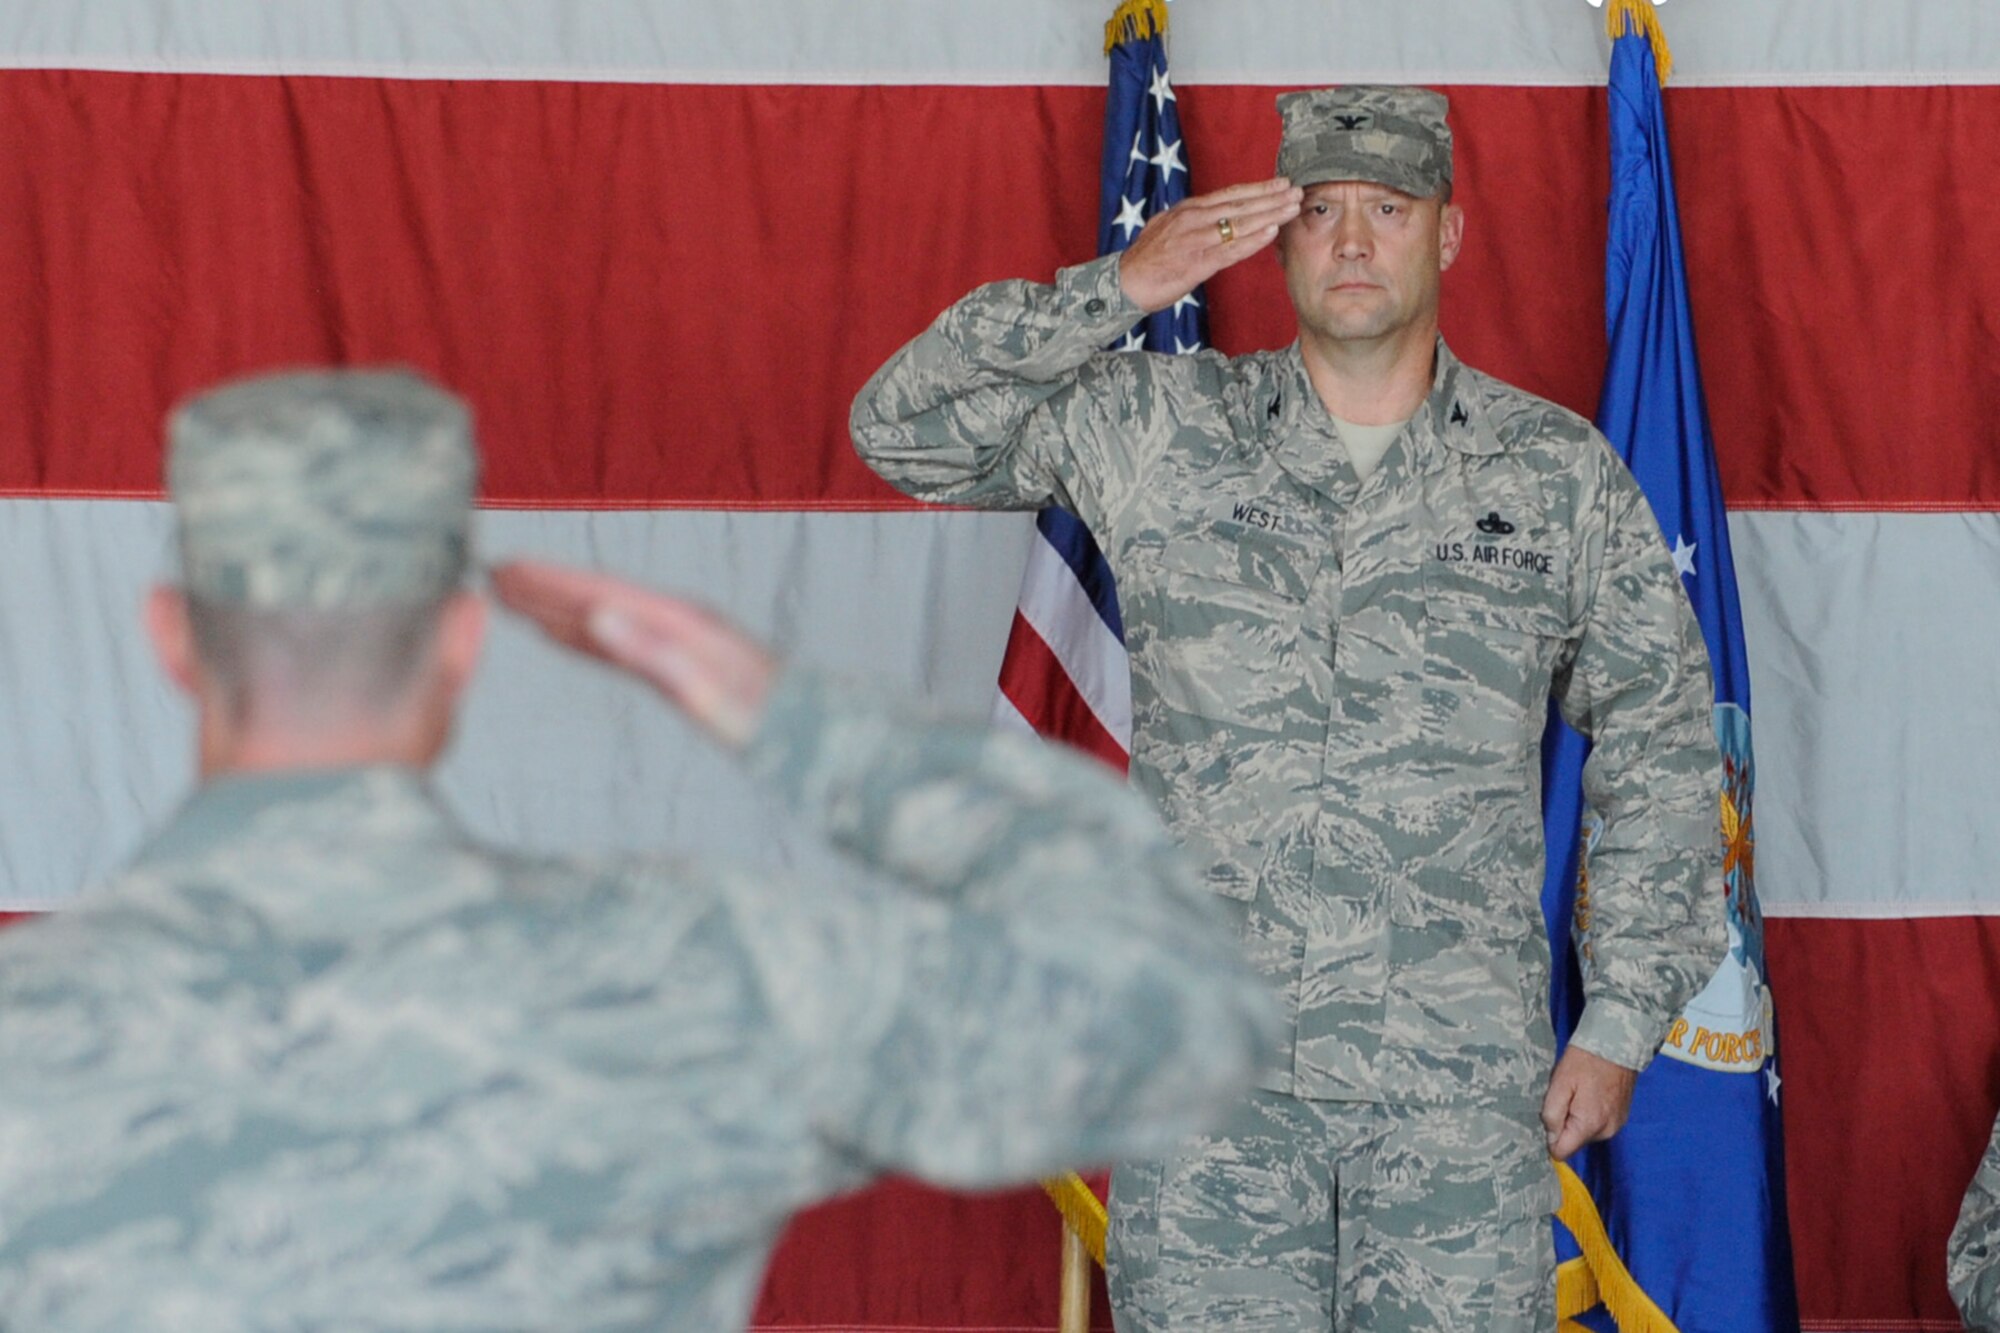 U.S. Air Force Col. Dane West, receives his first salute after taking command of his group during the 388th Maintenance Group change of command ceremony at Hill Air Force Base, Utah, June 29. The ceremony marks the official acceptance of West as the 388 MXG newest commander. (U.S. Air Force Photo/Todd Cromar/Released)